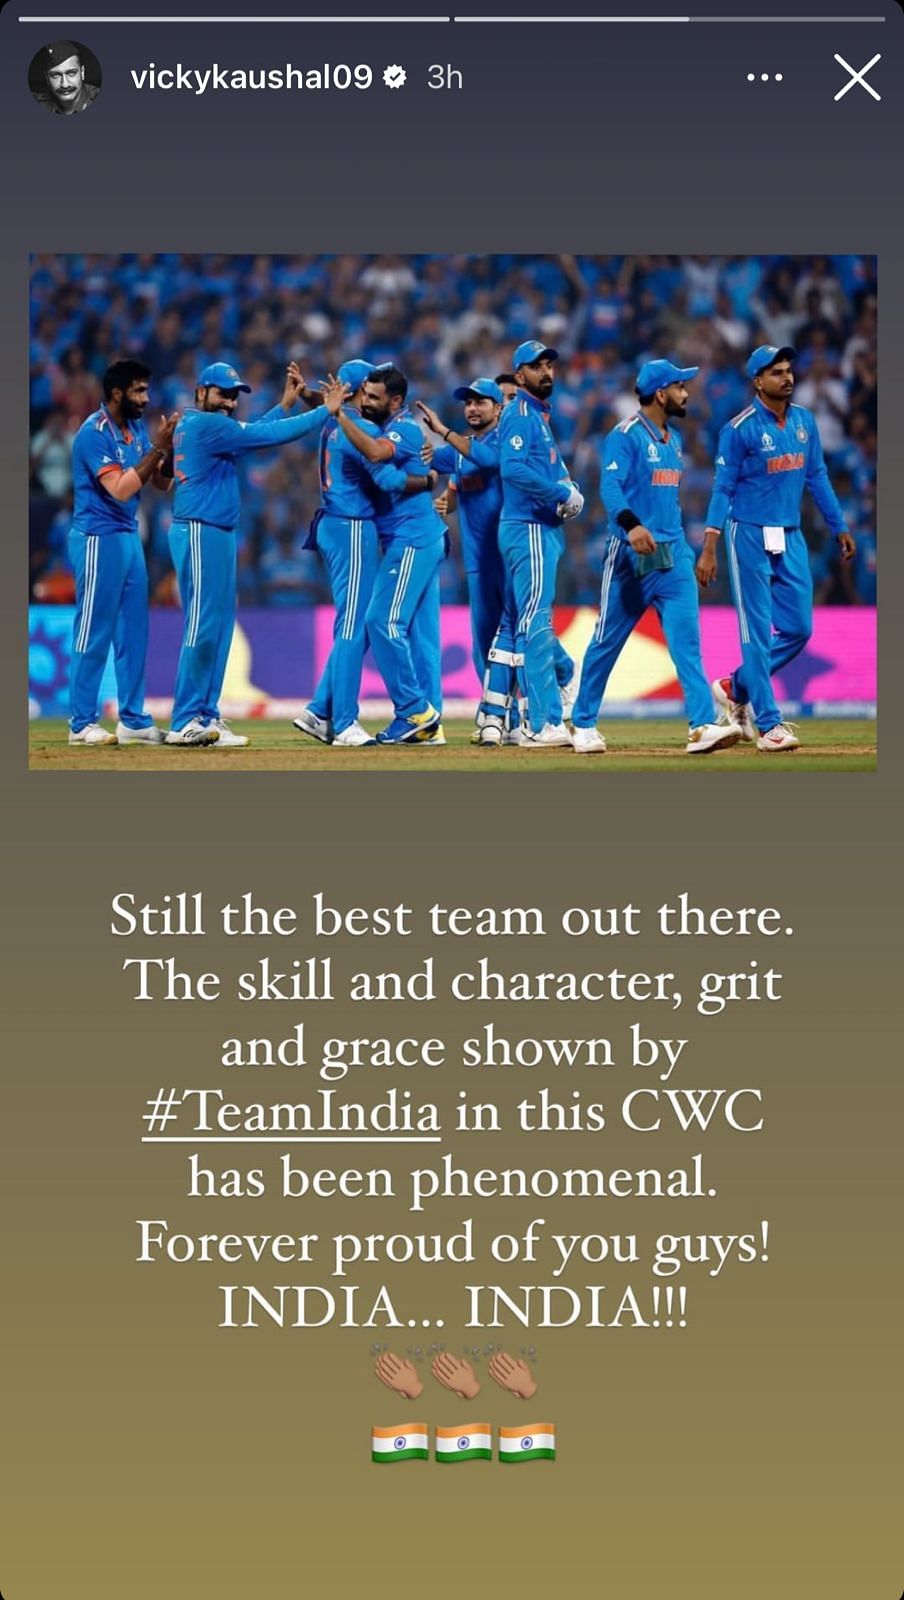 India lost to Australia by six wickets at the ICC World Cup 2023 final.